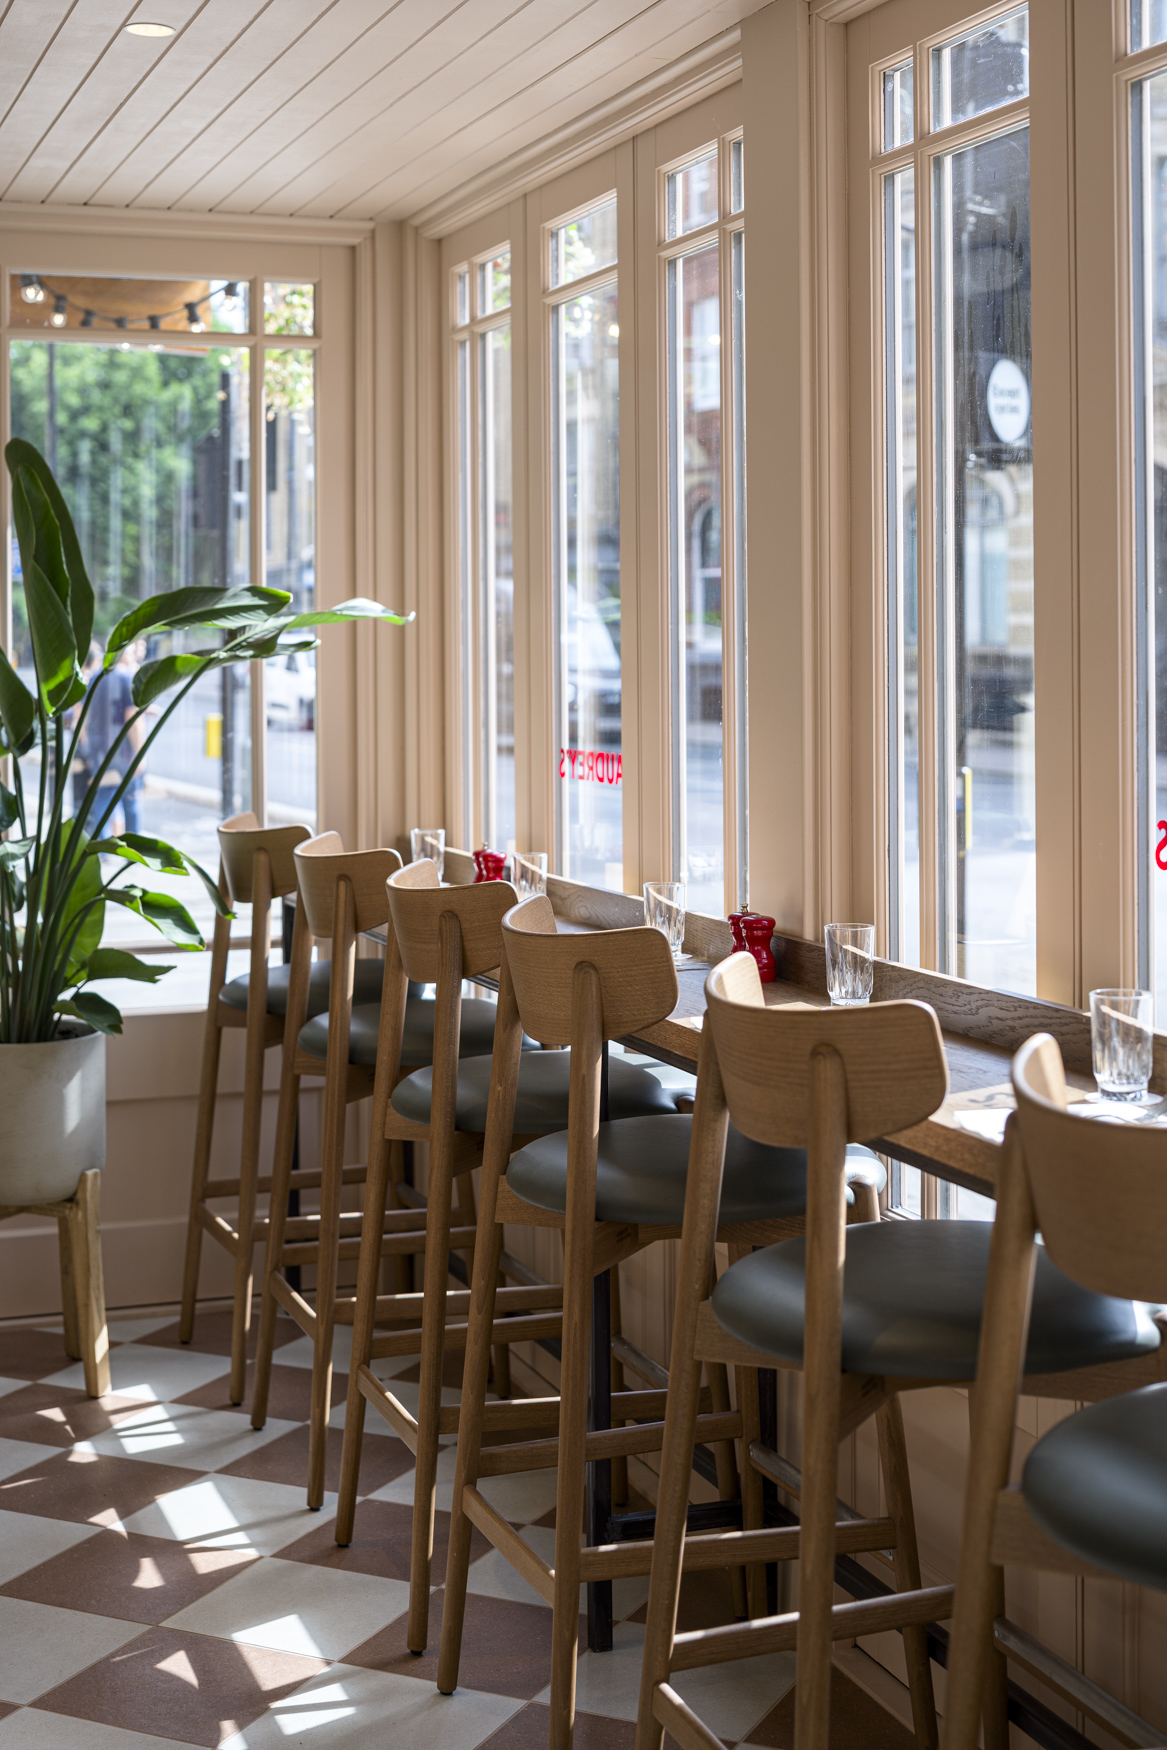 Audrey's Cafe & Bar Borough modern and retro restaurant designed by 3Stories Interior Design and branding creative agency London, featuring a row of high seating chairs and large windows